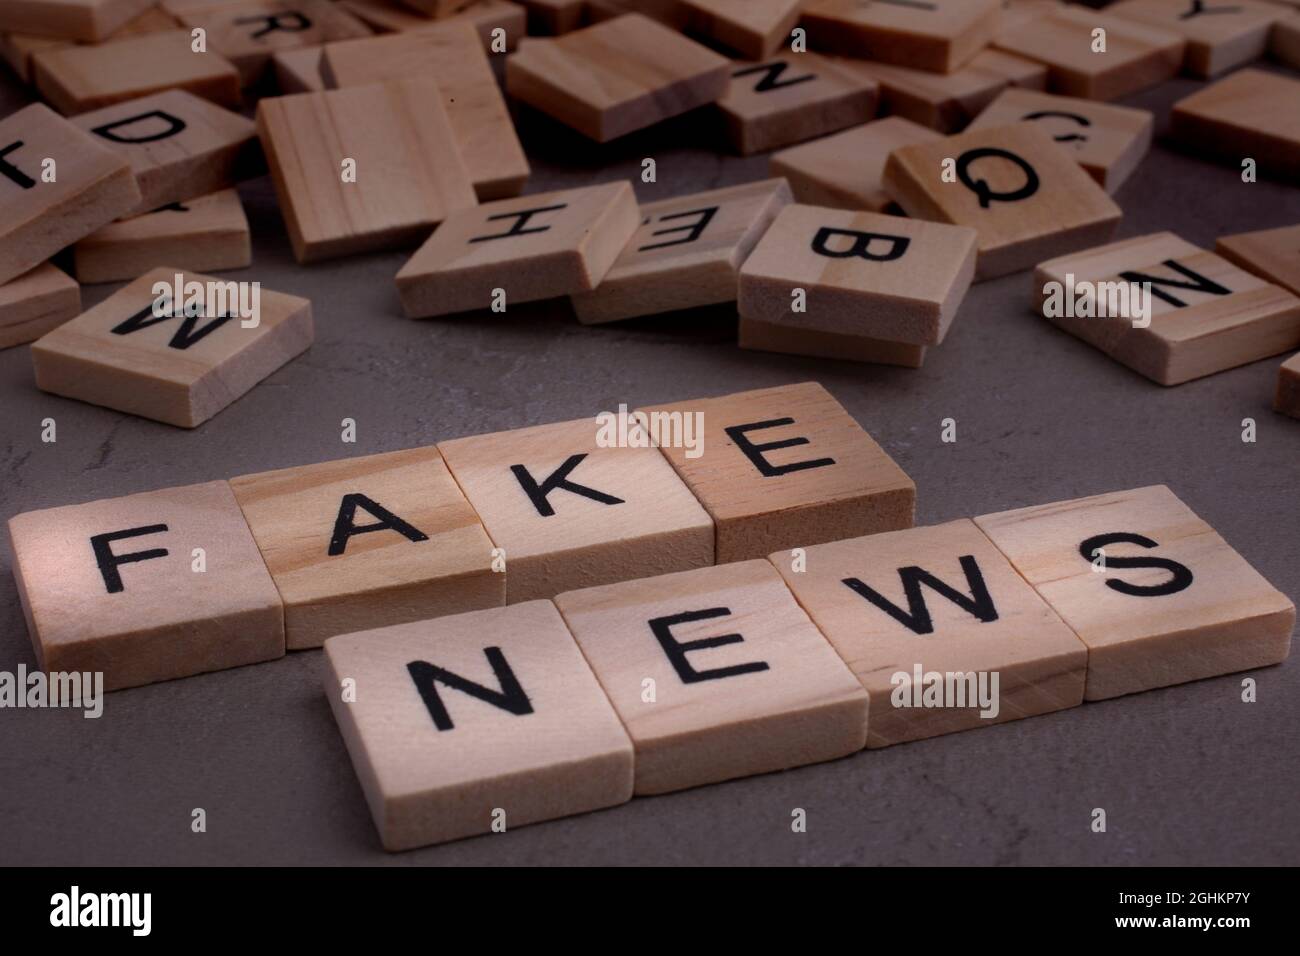 Top view of wooden blocks with letters -text  fake news Stock Photo